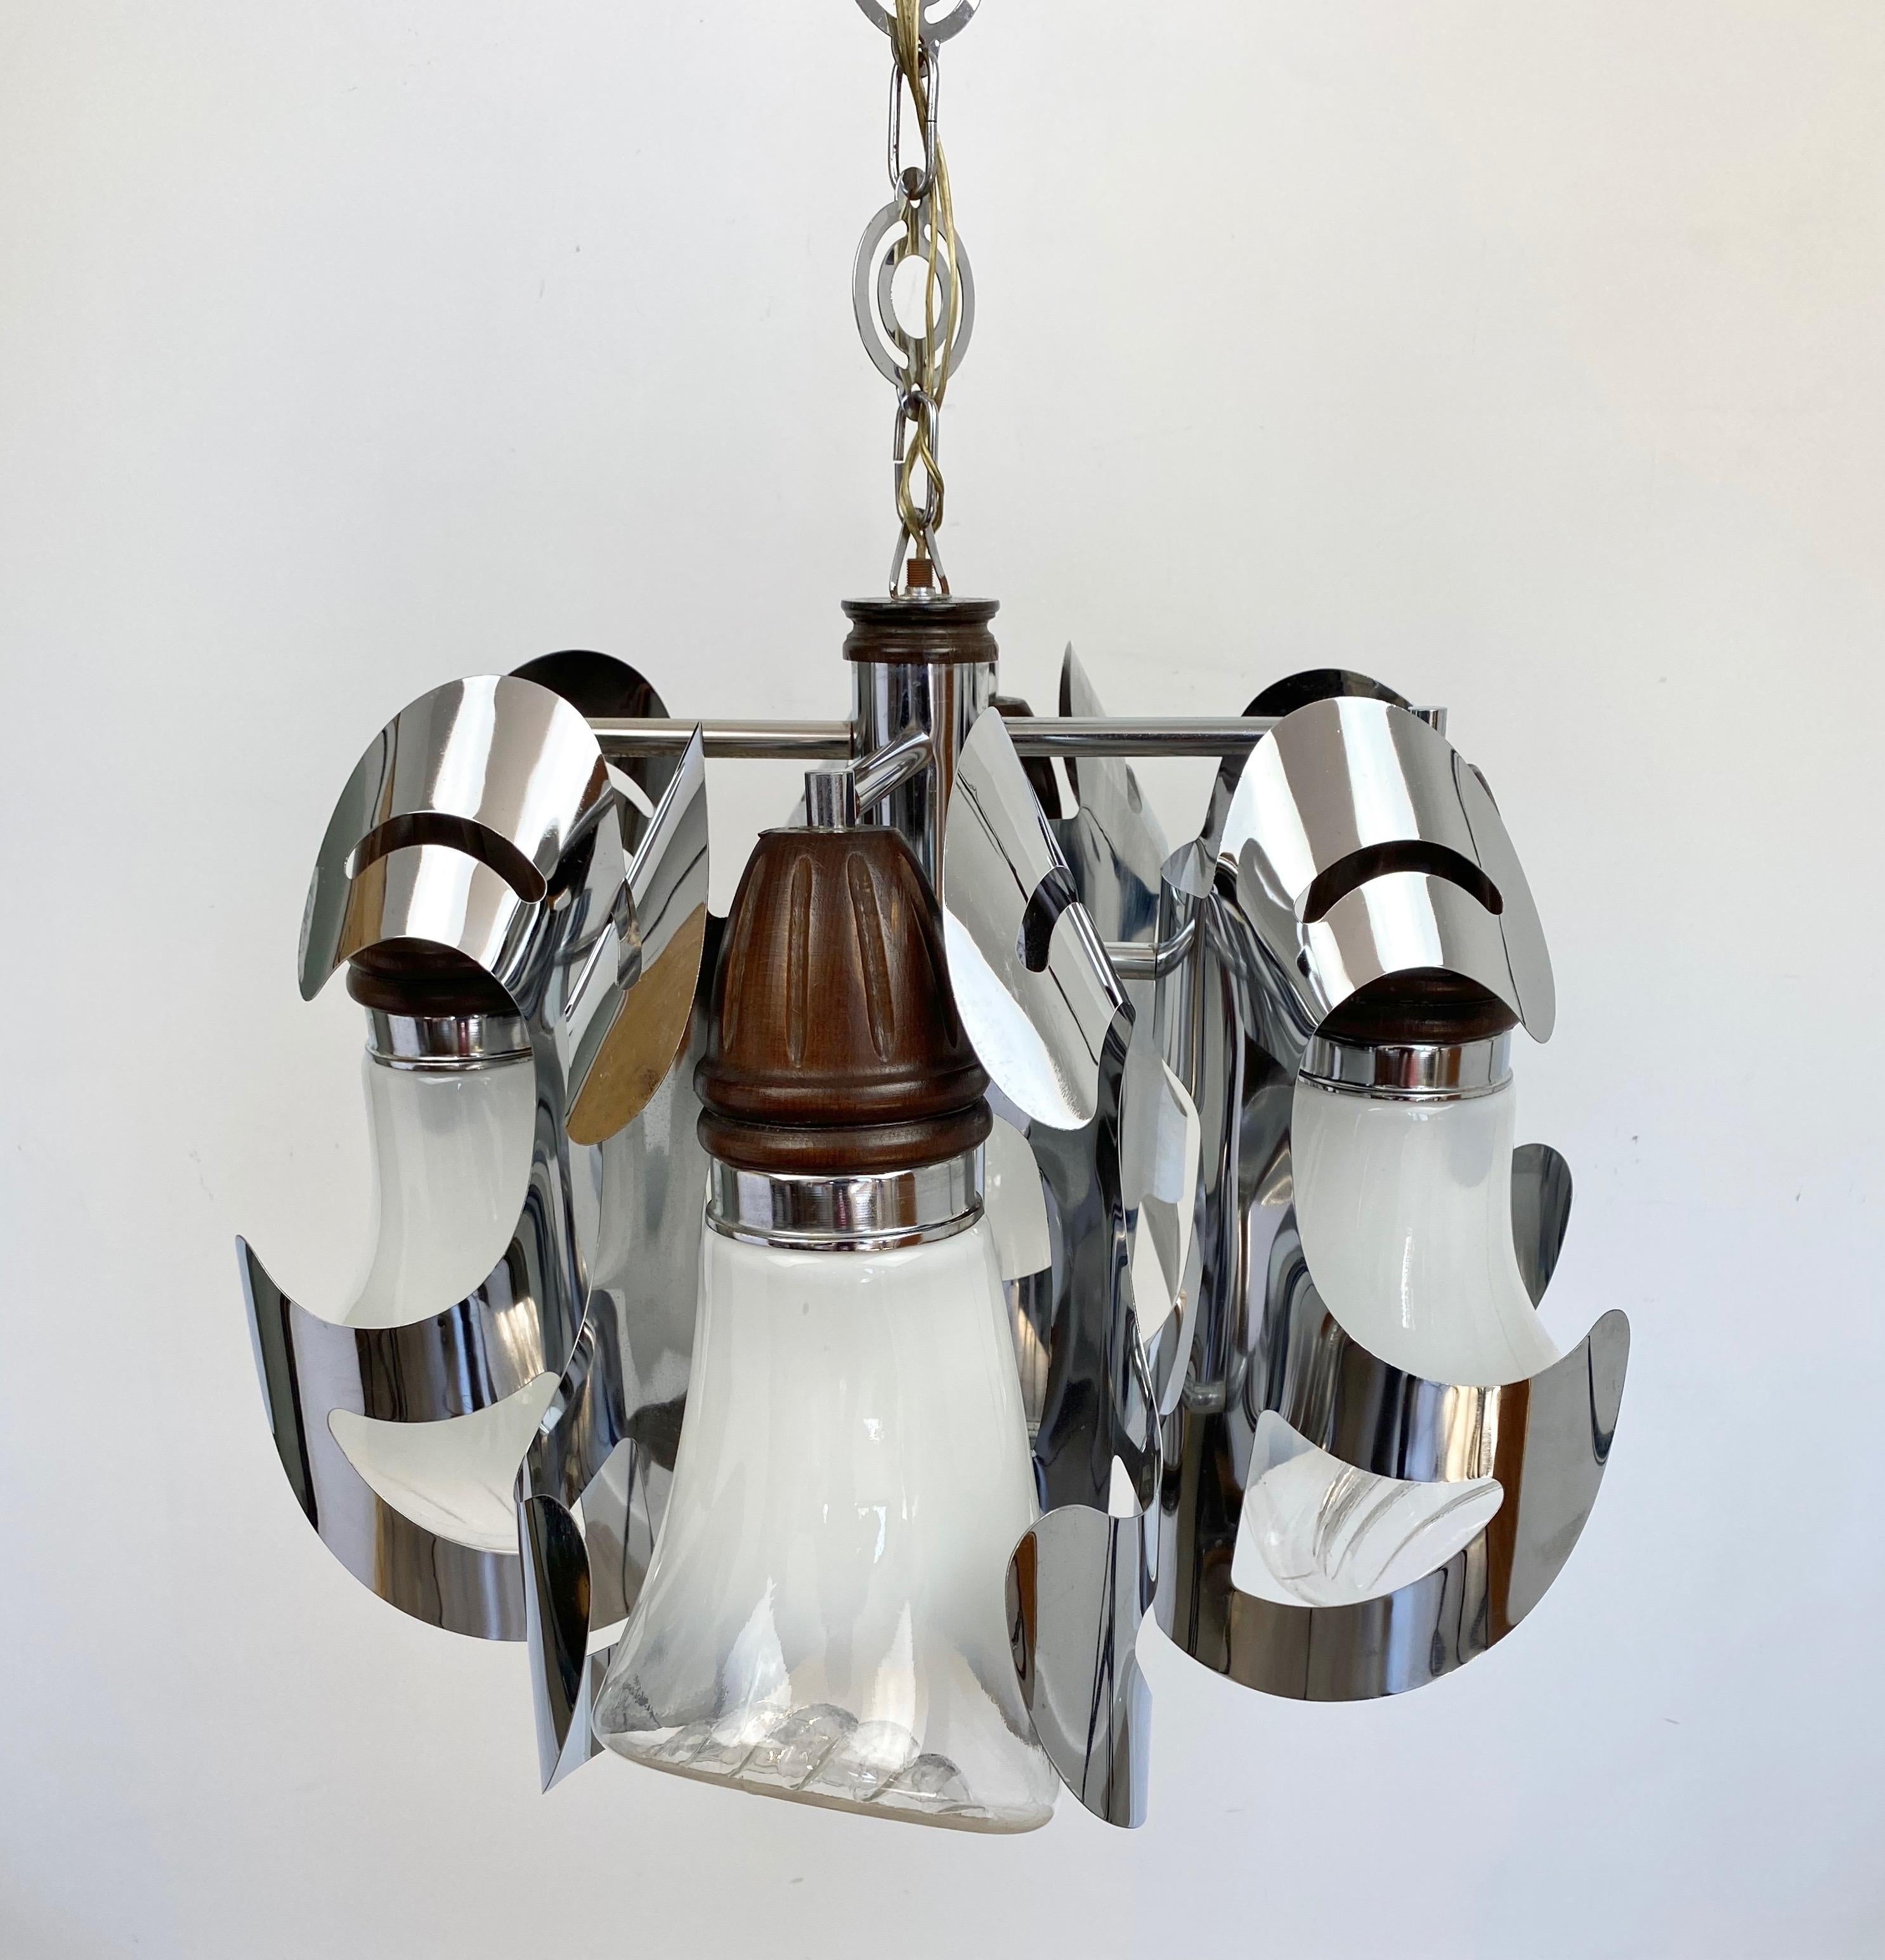 Chandelier pendant in chrome, wood and Murano glass, four-light. Made by the Italian Mazzega, Italy, circa 1970.